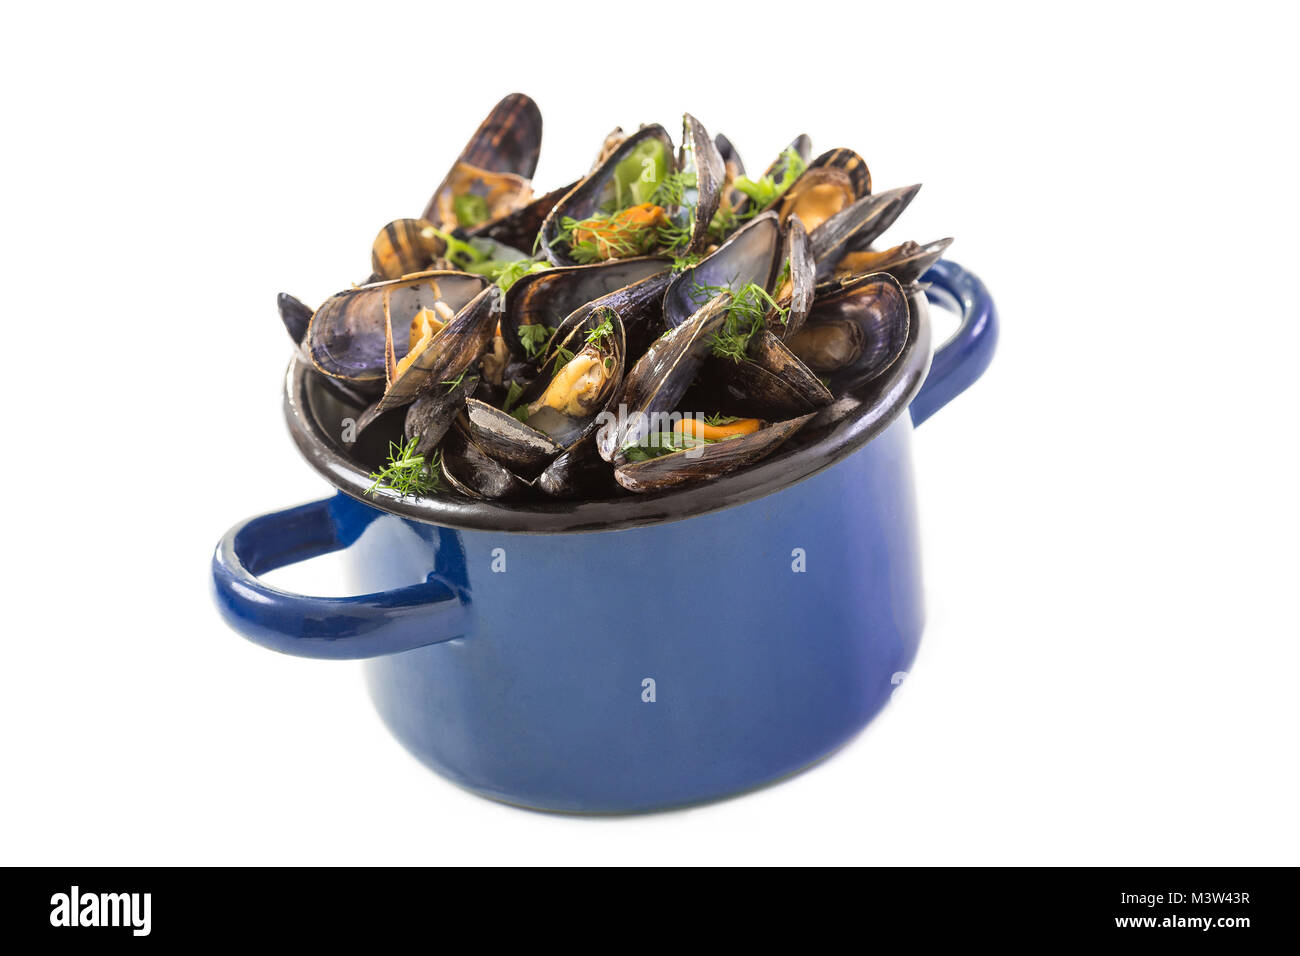 mussels in a blue ceramic pot on a white background. Healthy eating concept. Meditteranean lifestyle. Stock Photo